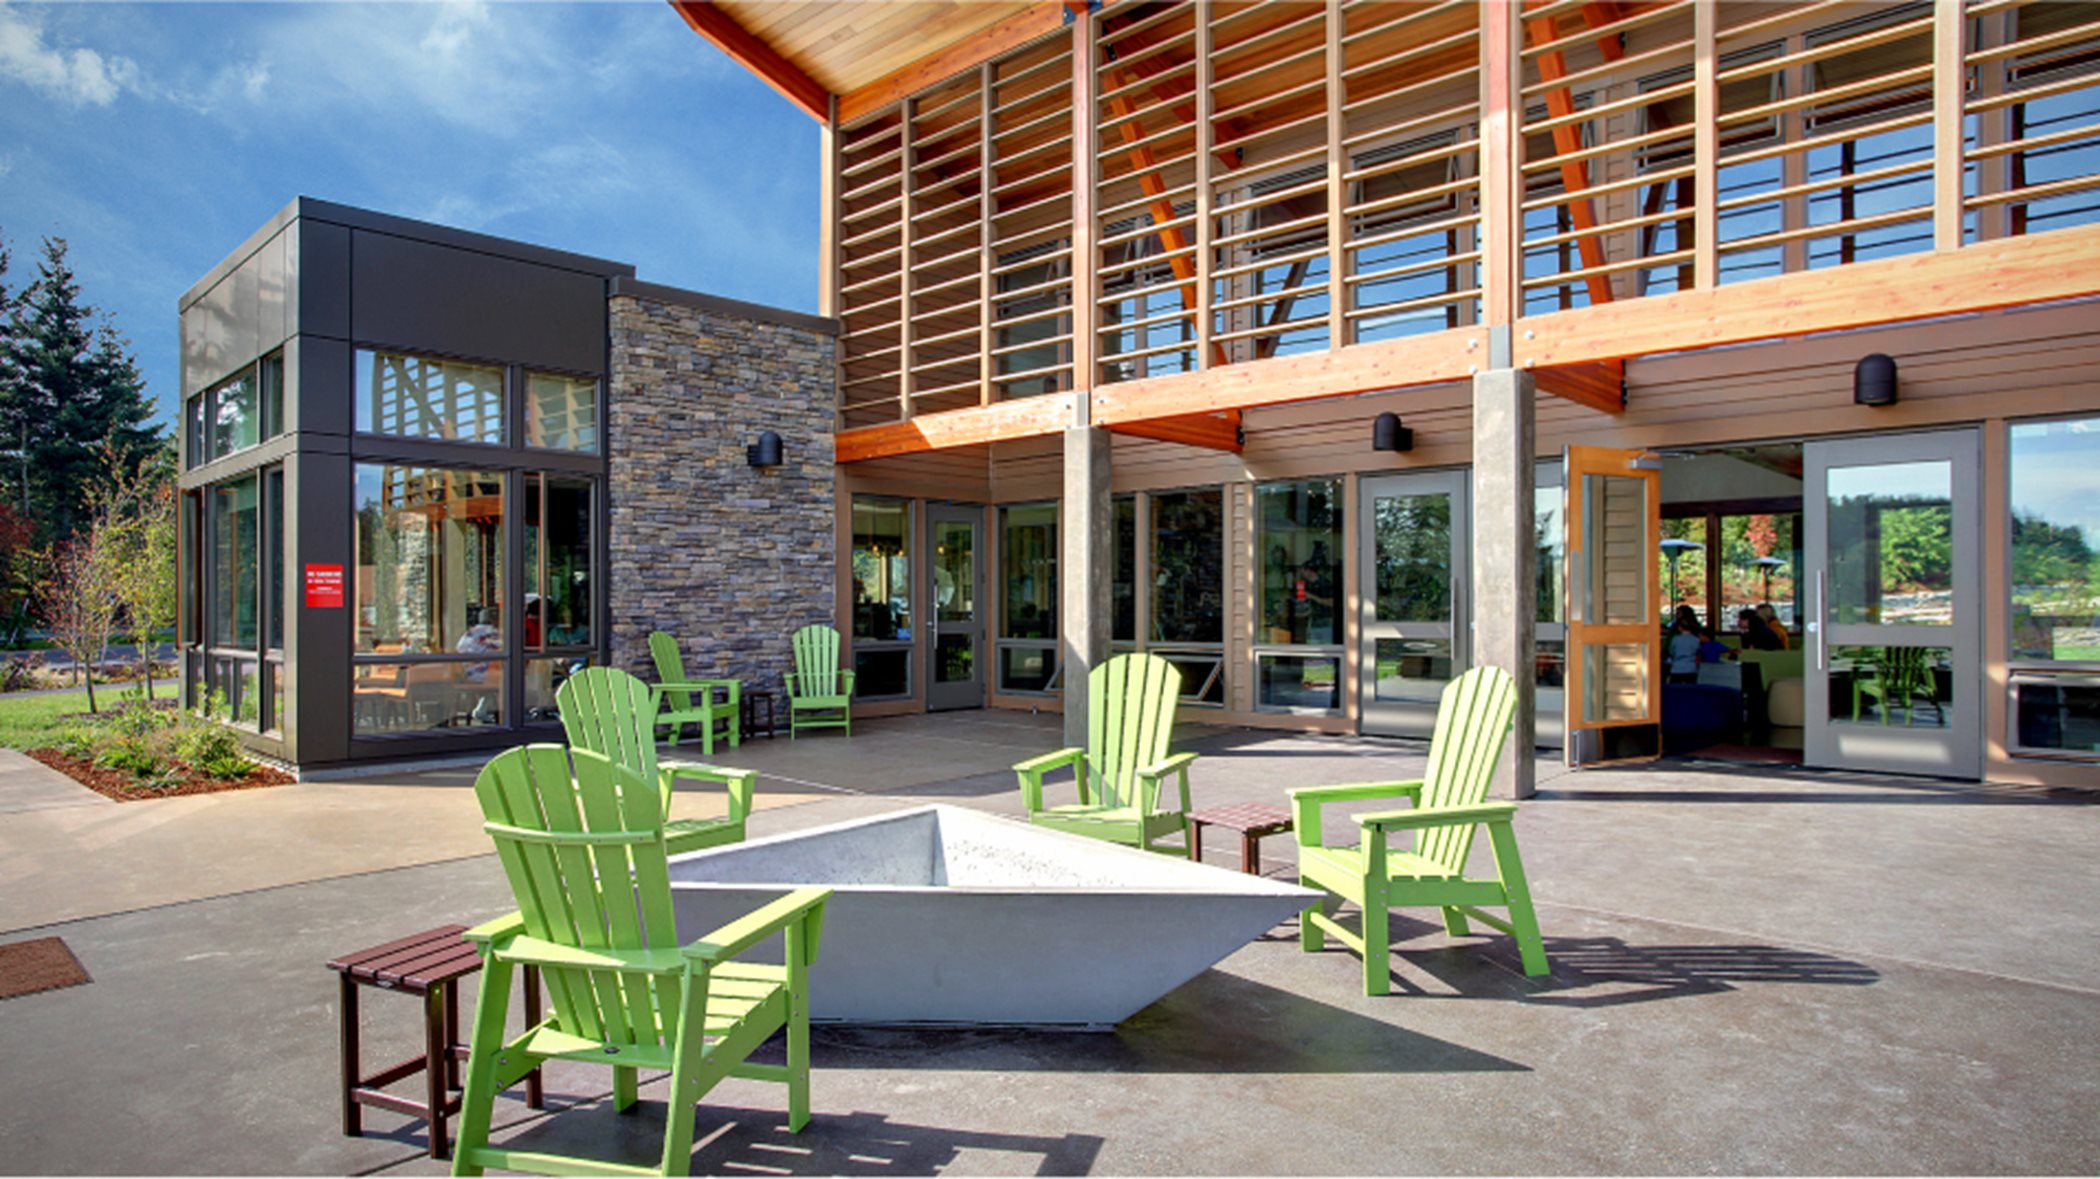 Community center exterior with outdoor seating